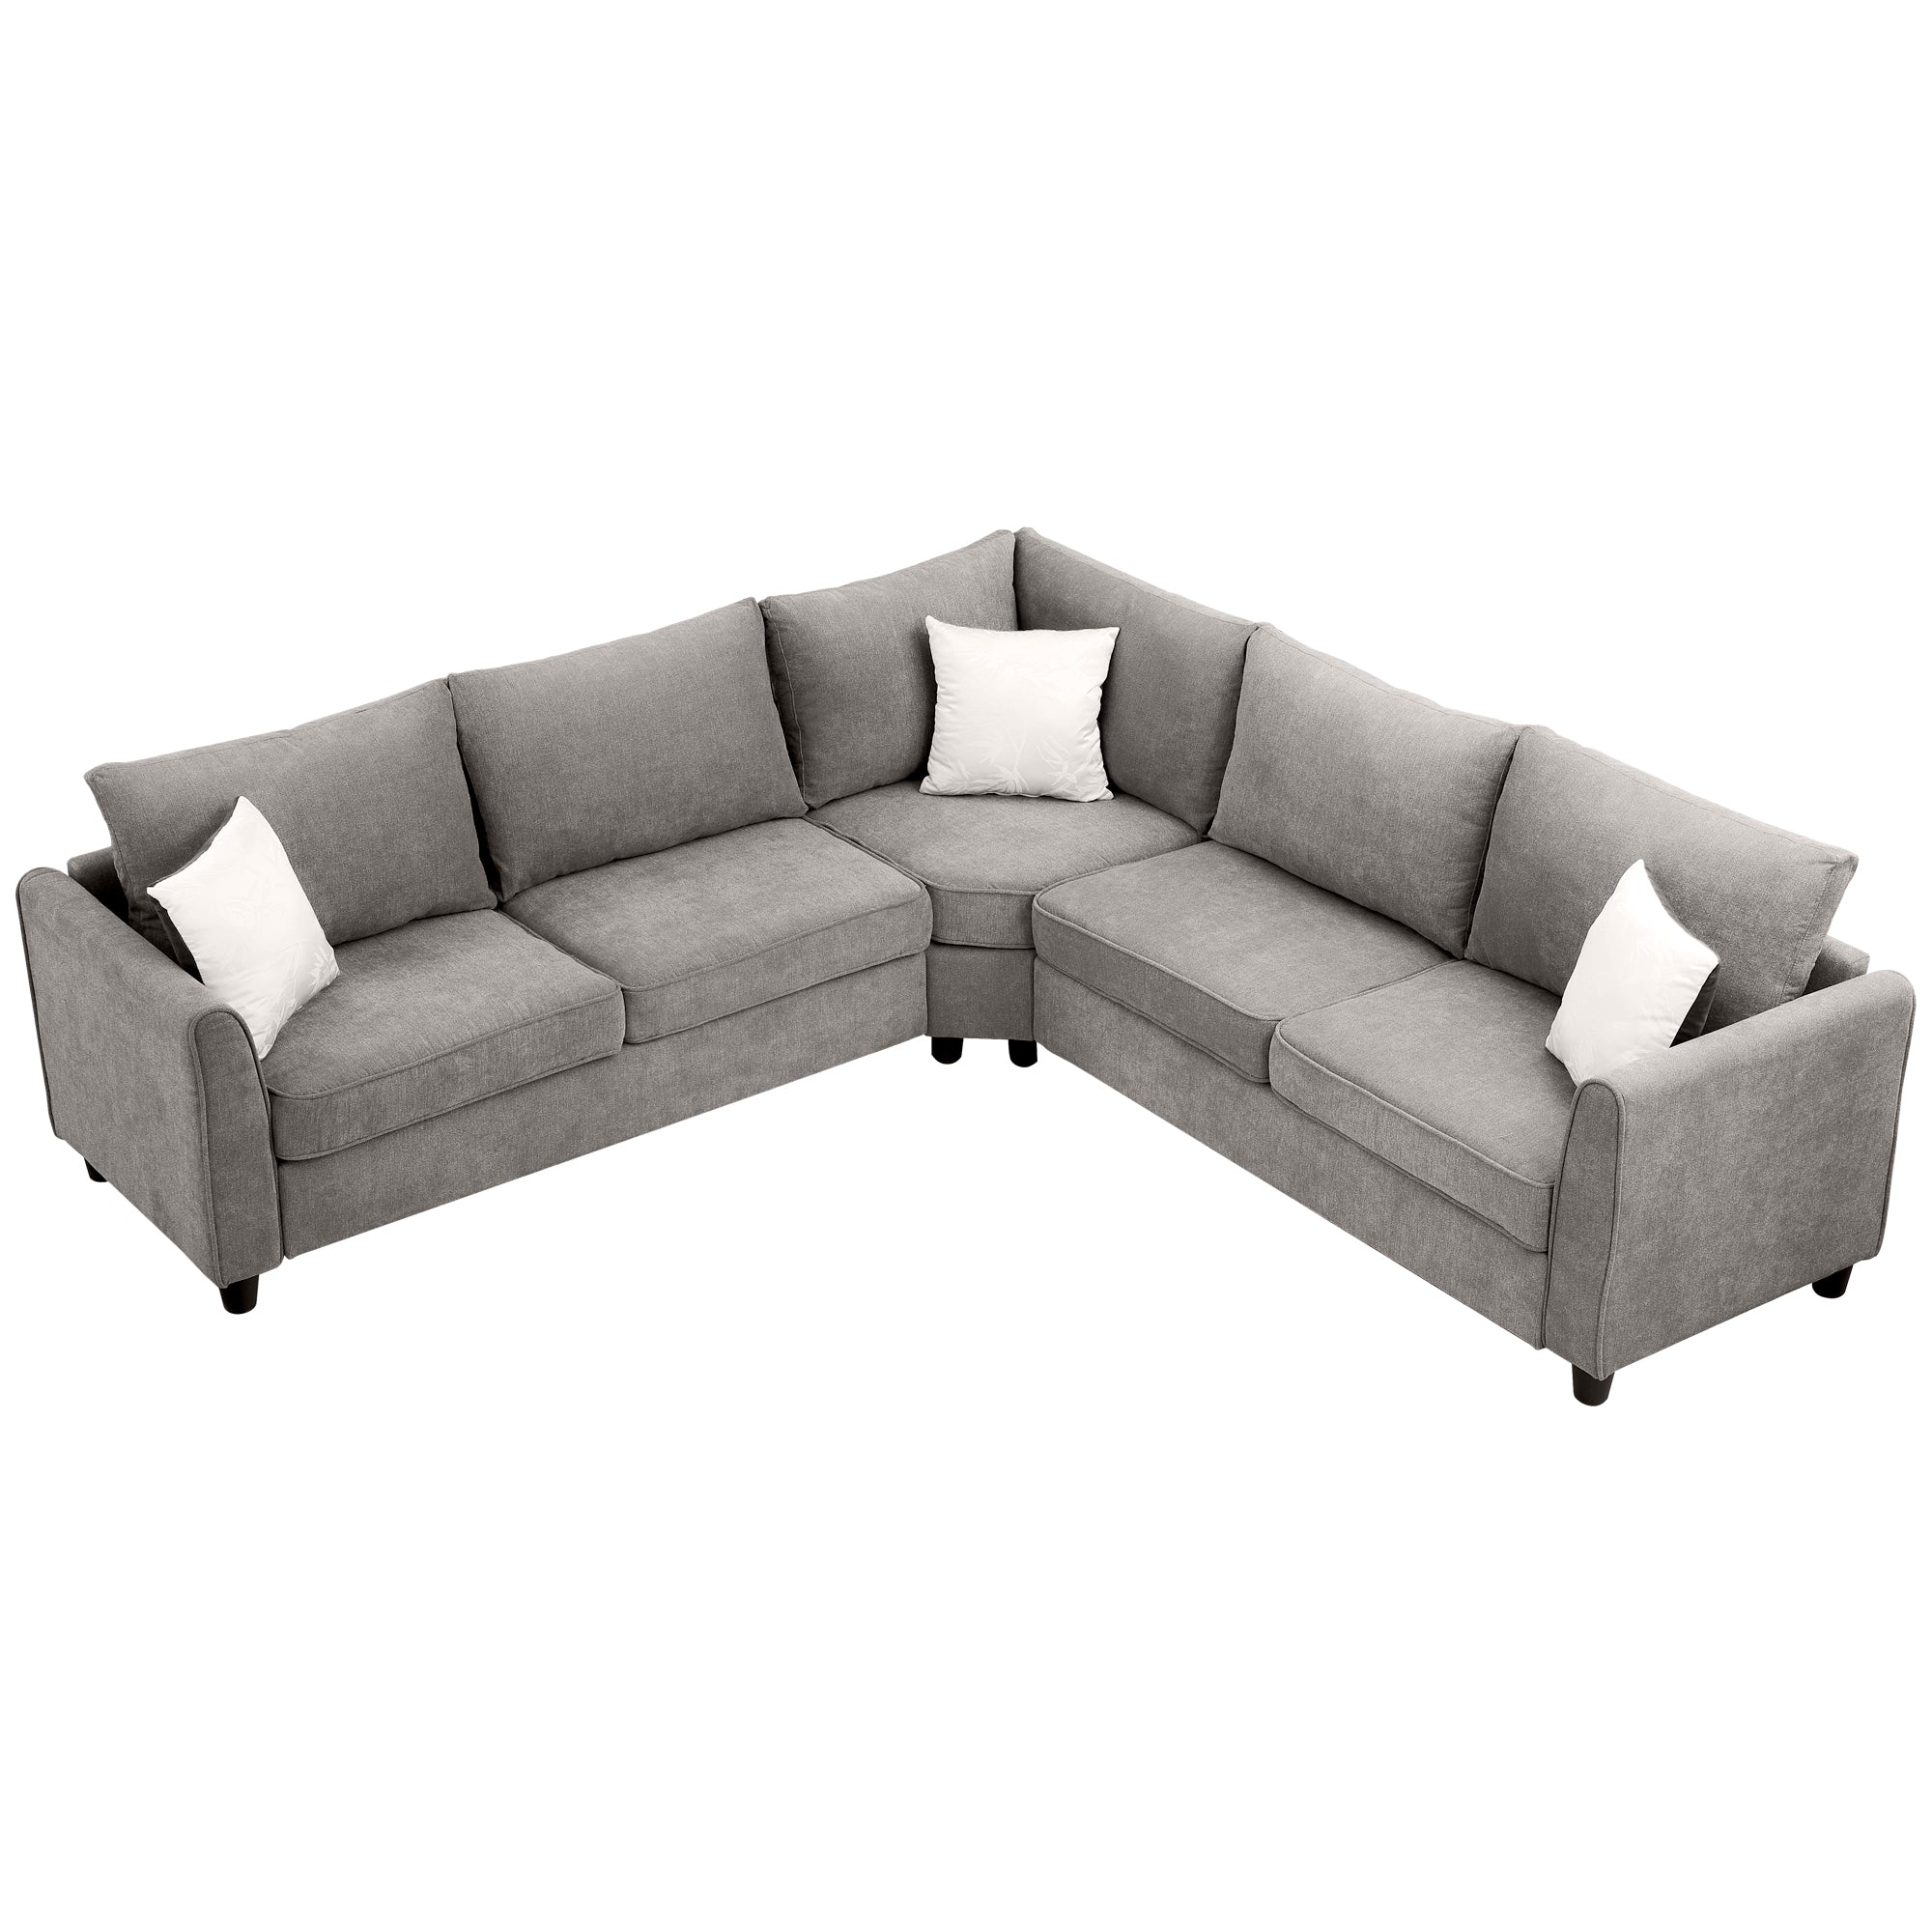 Big Sectional Sofa Couch L Shape Couch for Home Use Fabric Grey 3 Pillows Included